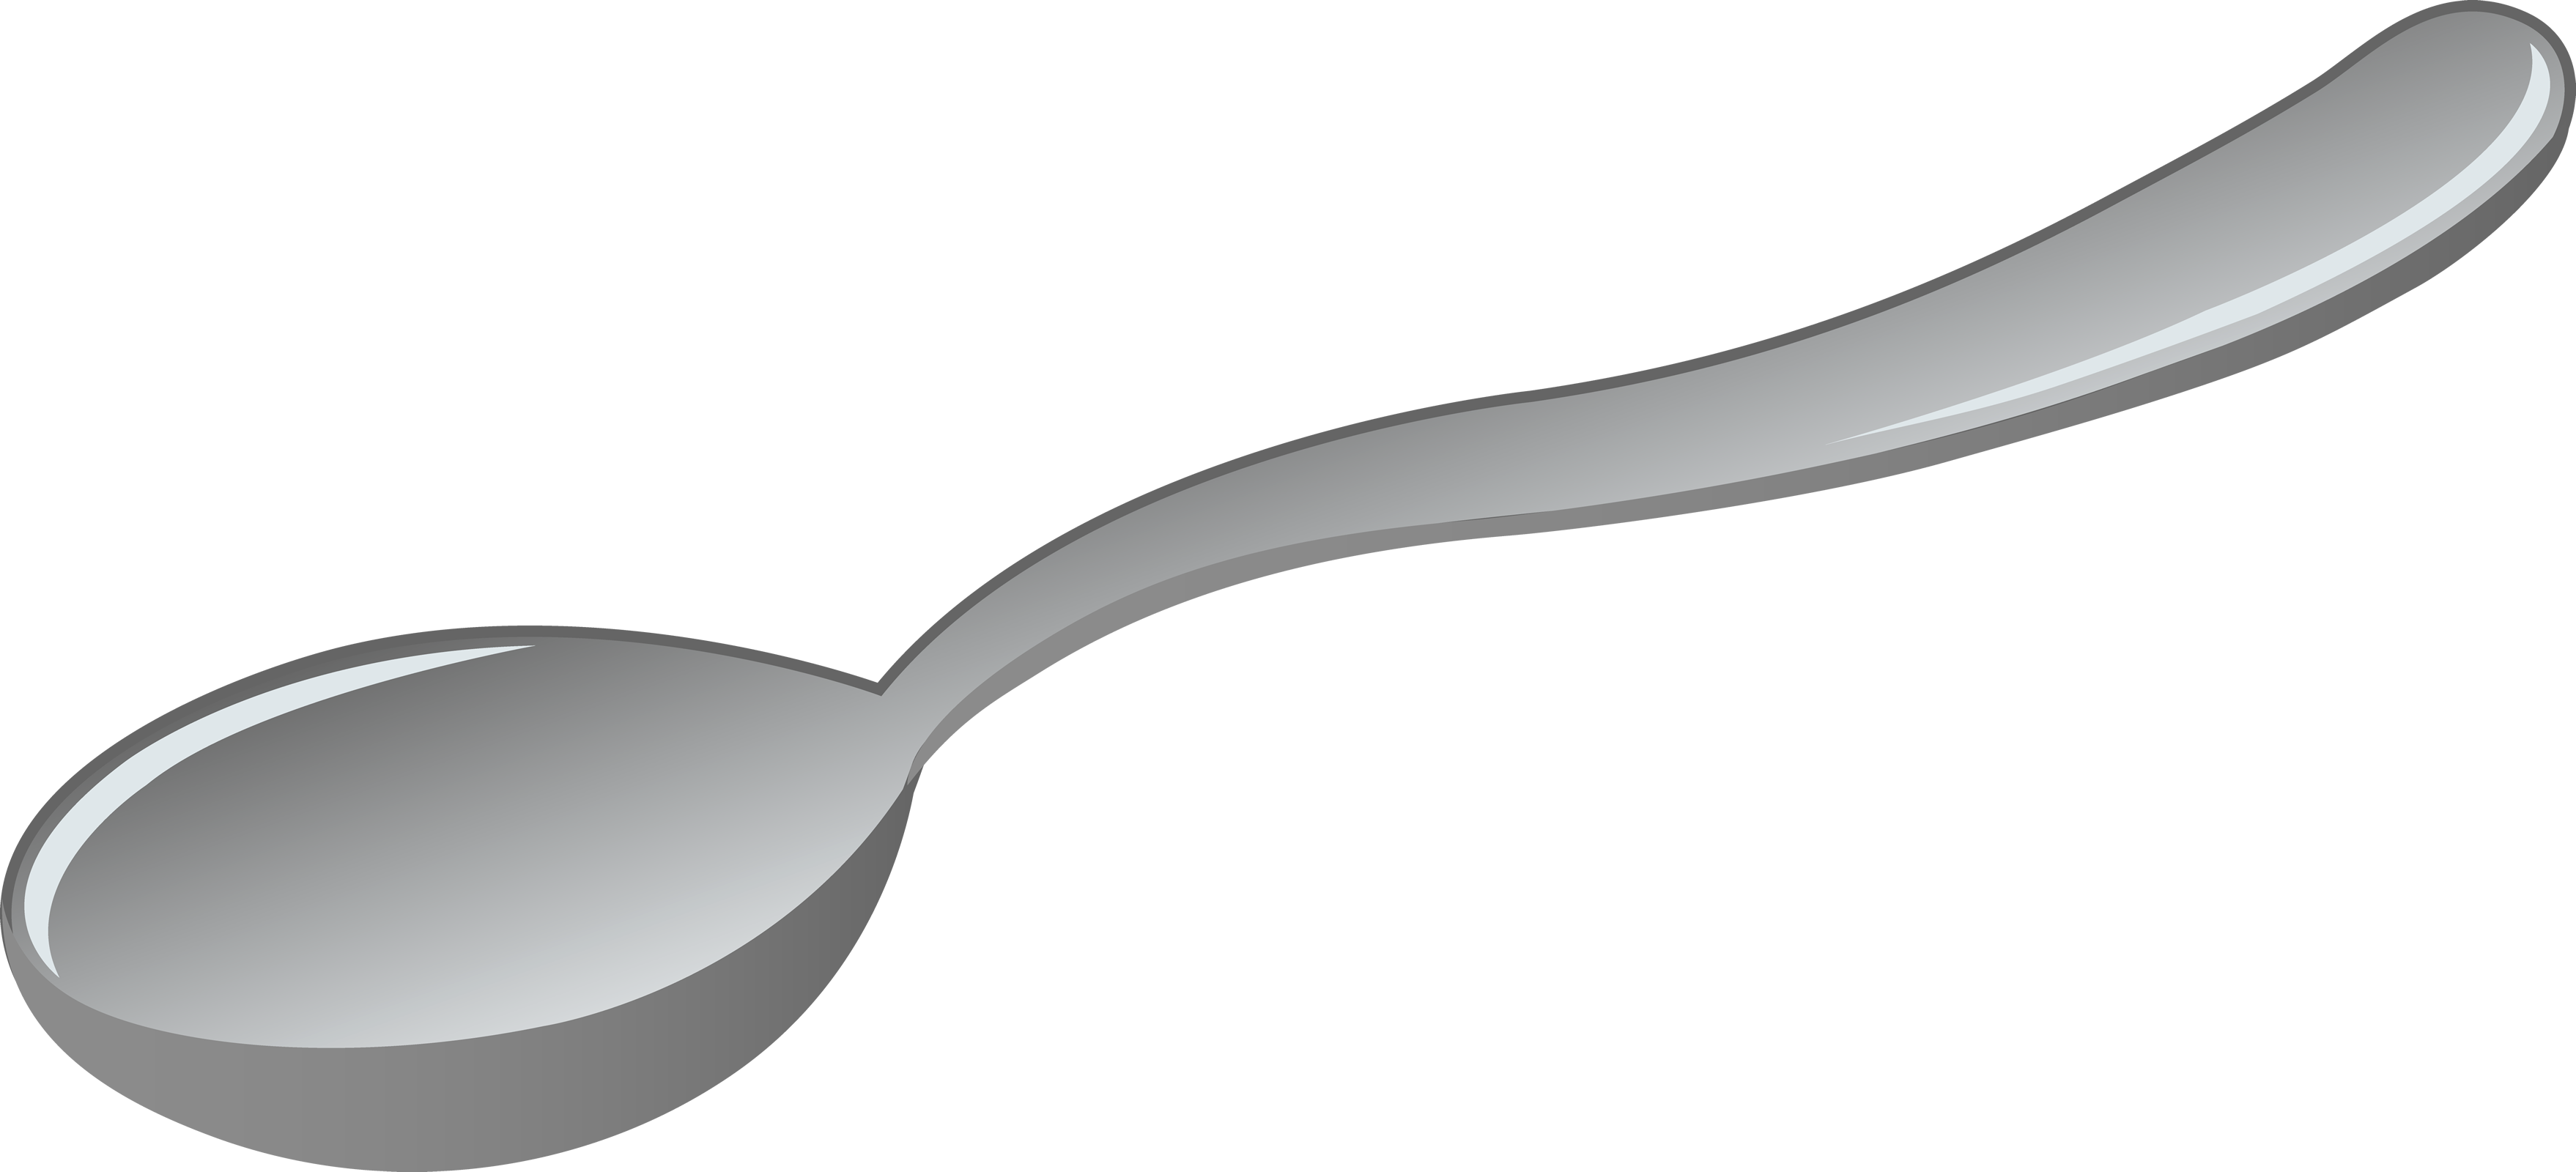 Spoon PNG - 2714